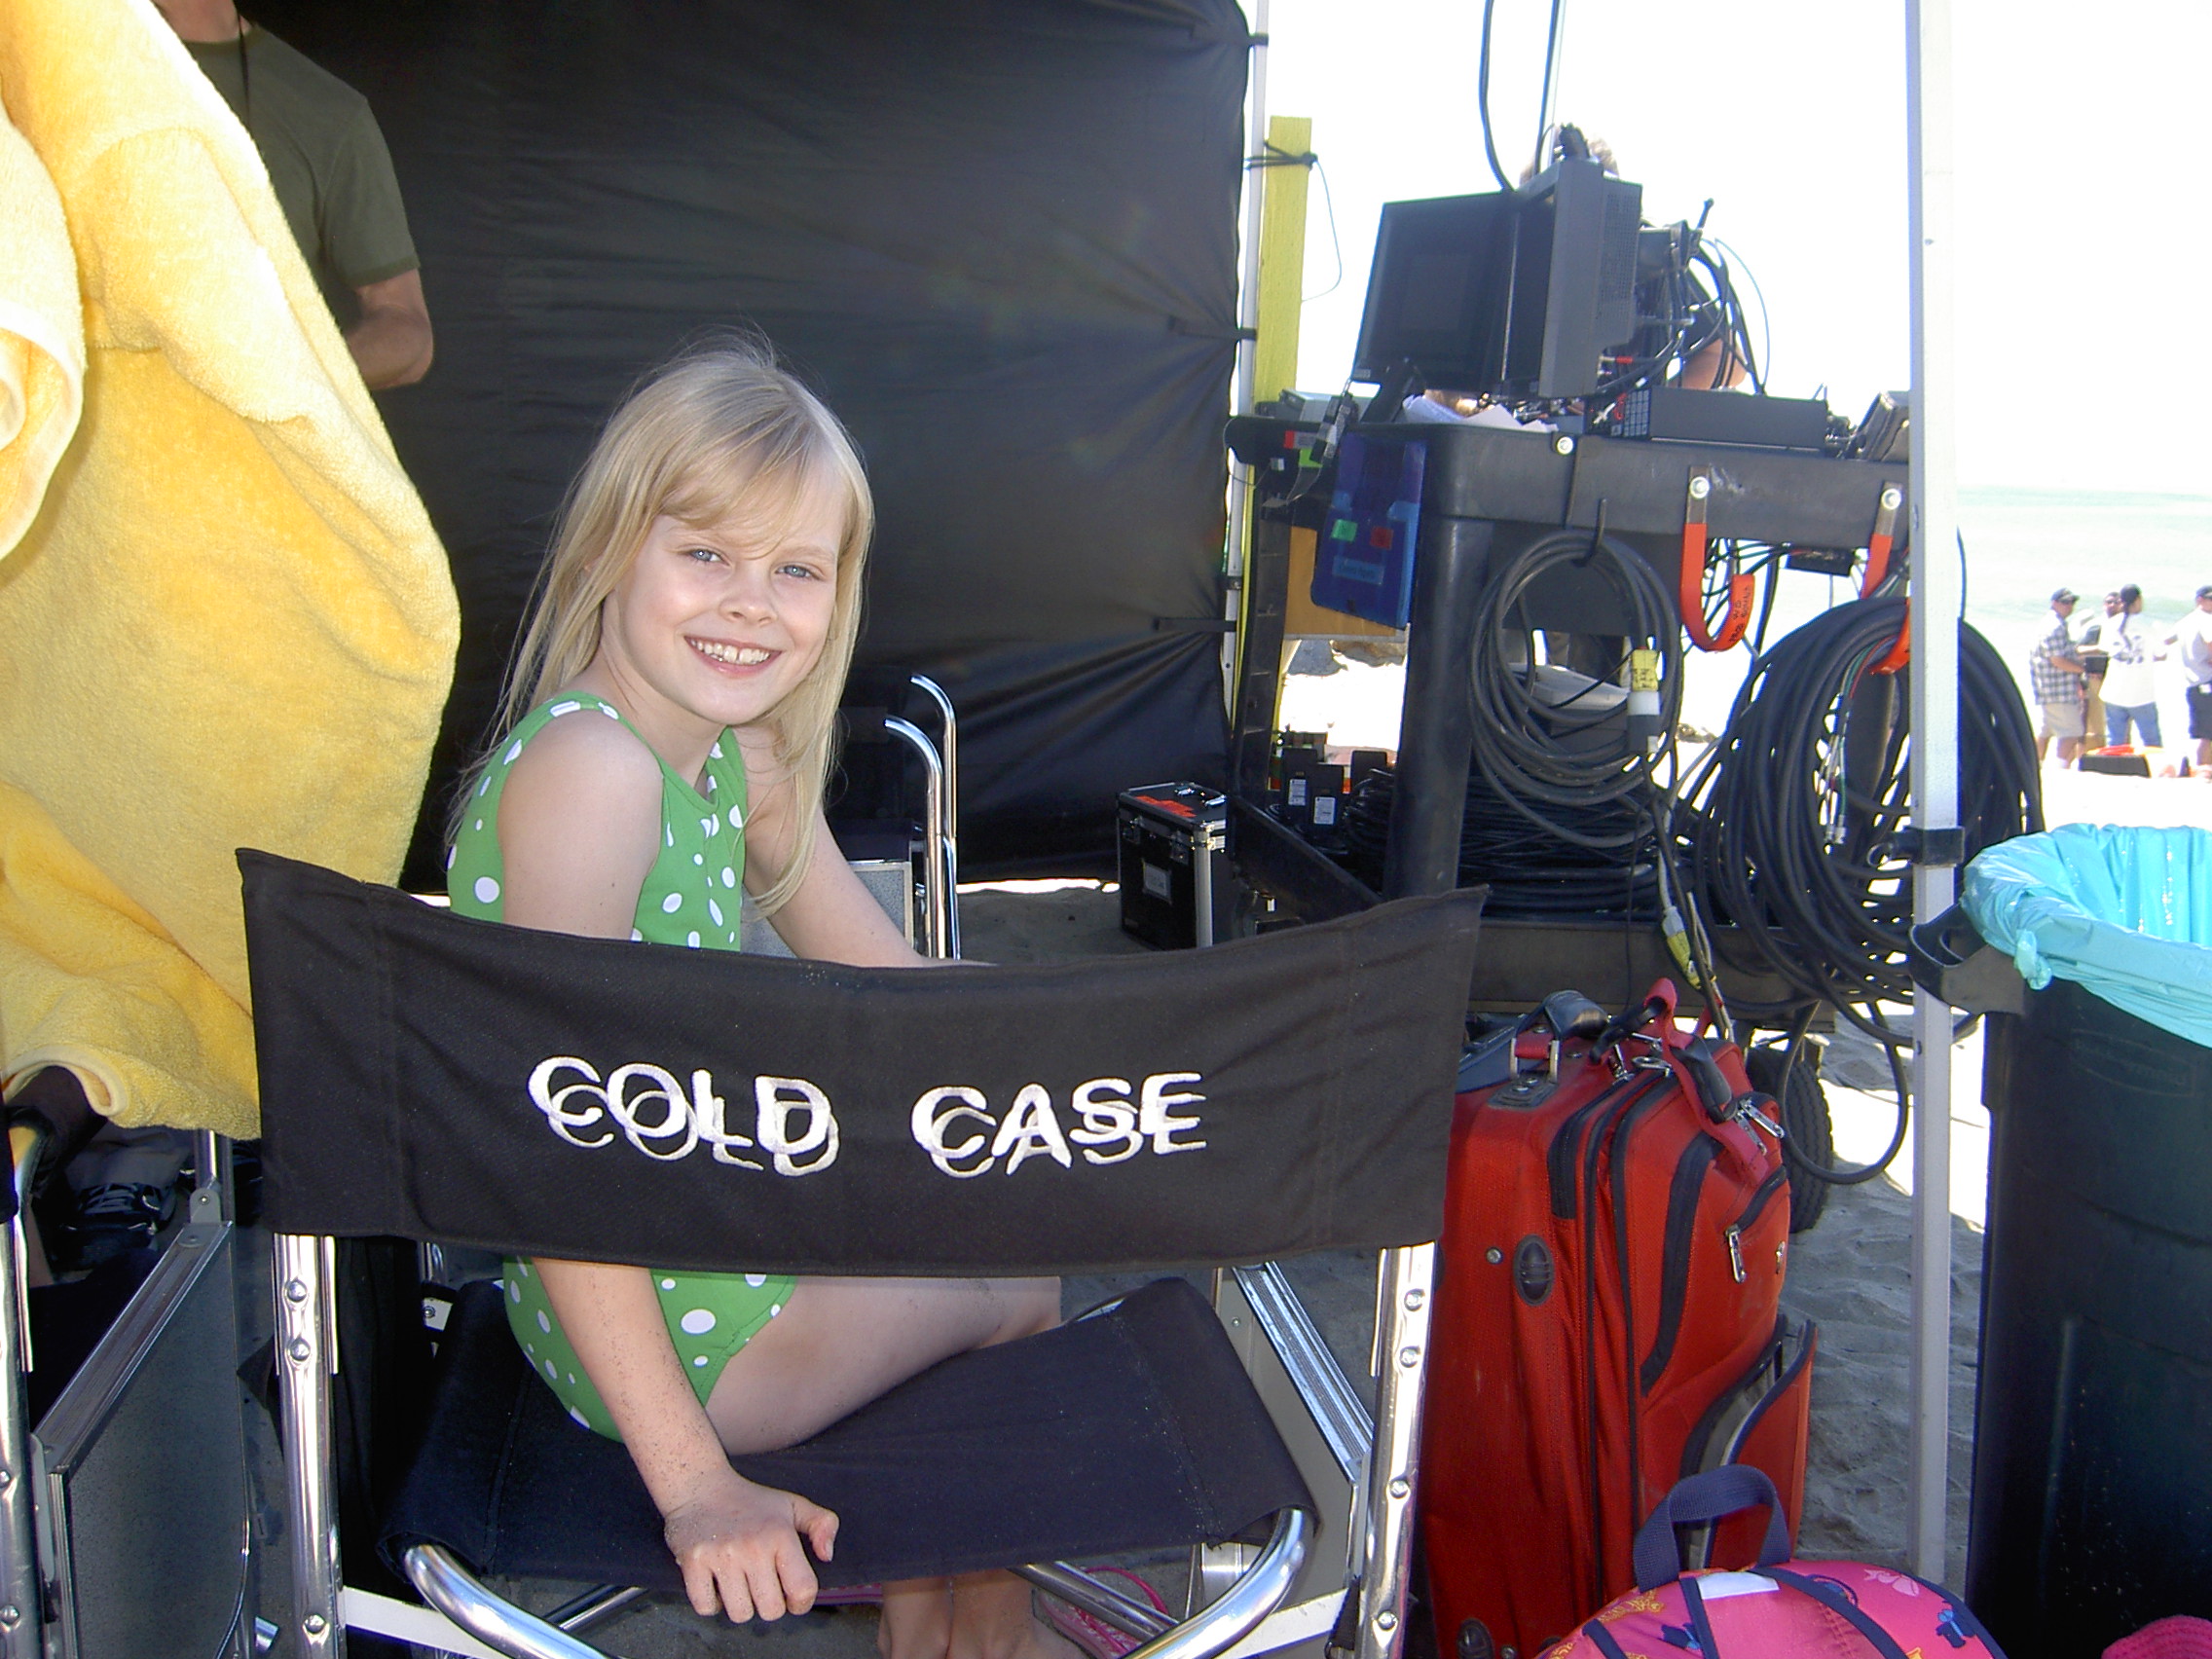 Harley as young Lily Rush (Kathryn Morris)on Cold Case set.